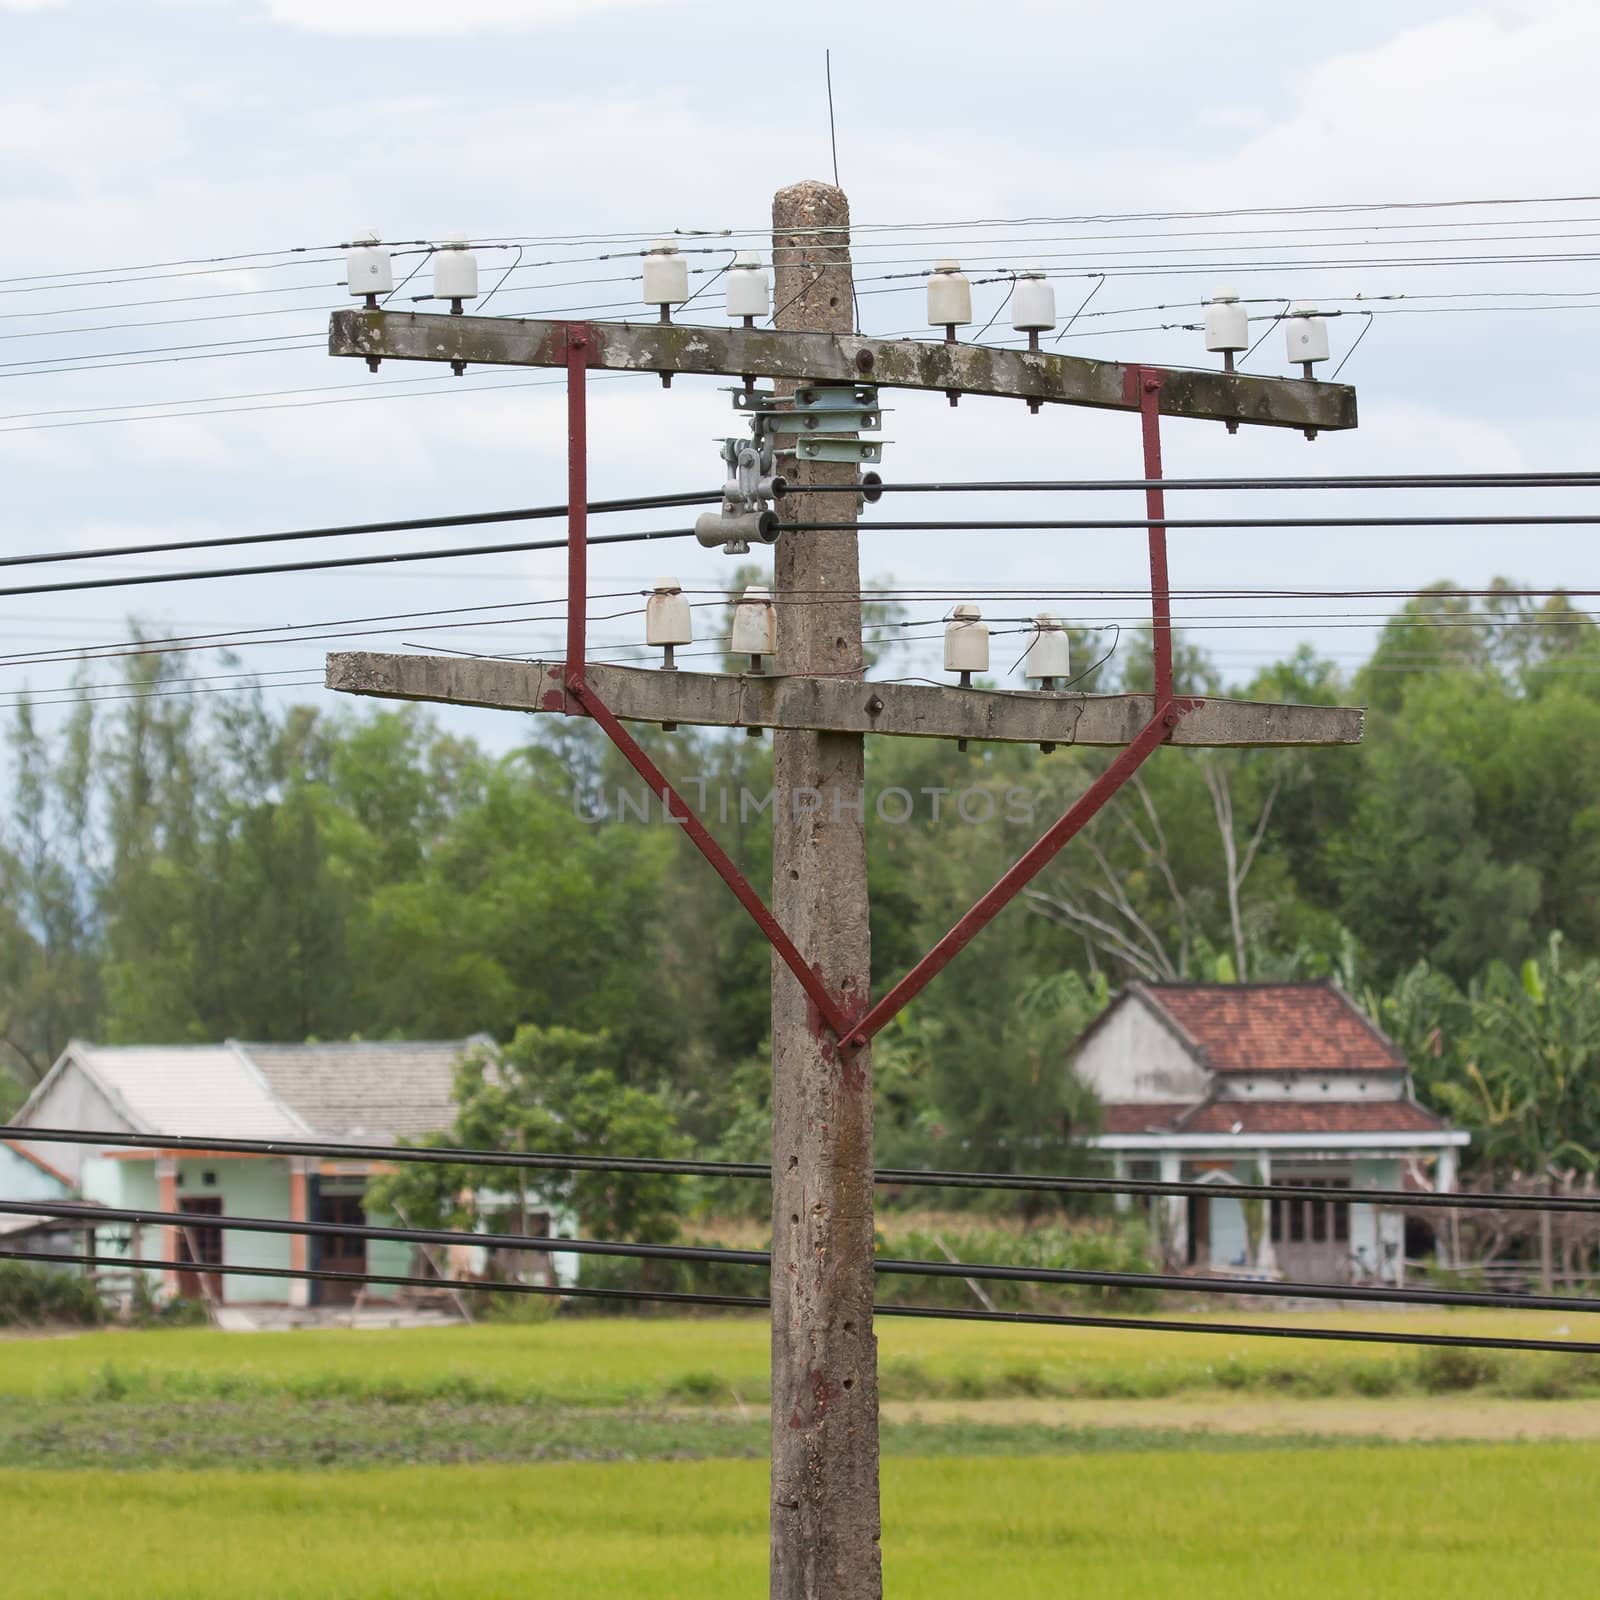 Small electrical tower in Vietnam by michaklootwijk